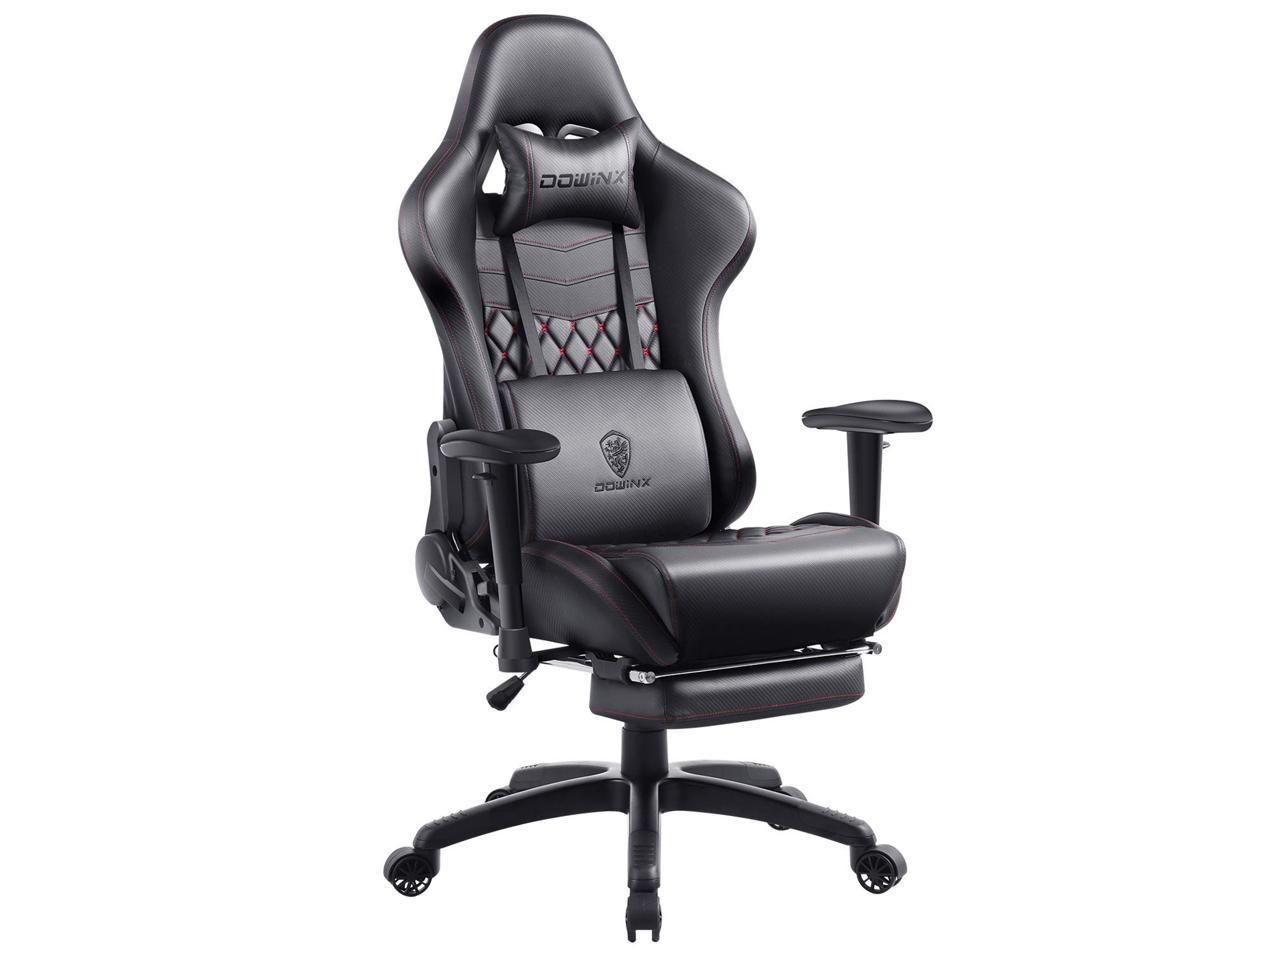 Dowinx Gaming Chair Ergonomic Racing Style Recliner With Massage Lumbar Support Office Armchair For Computer Pu Leather With Retractable Footrest Black Newegg Com